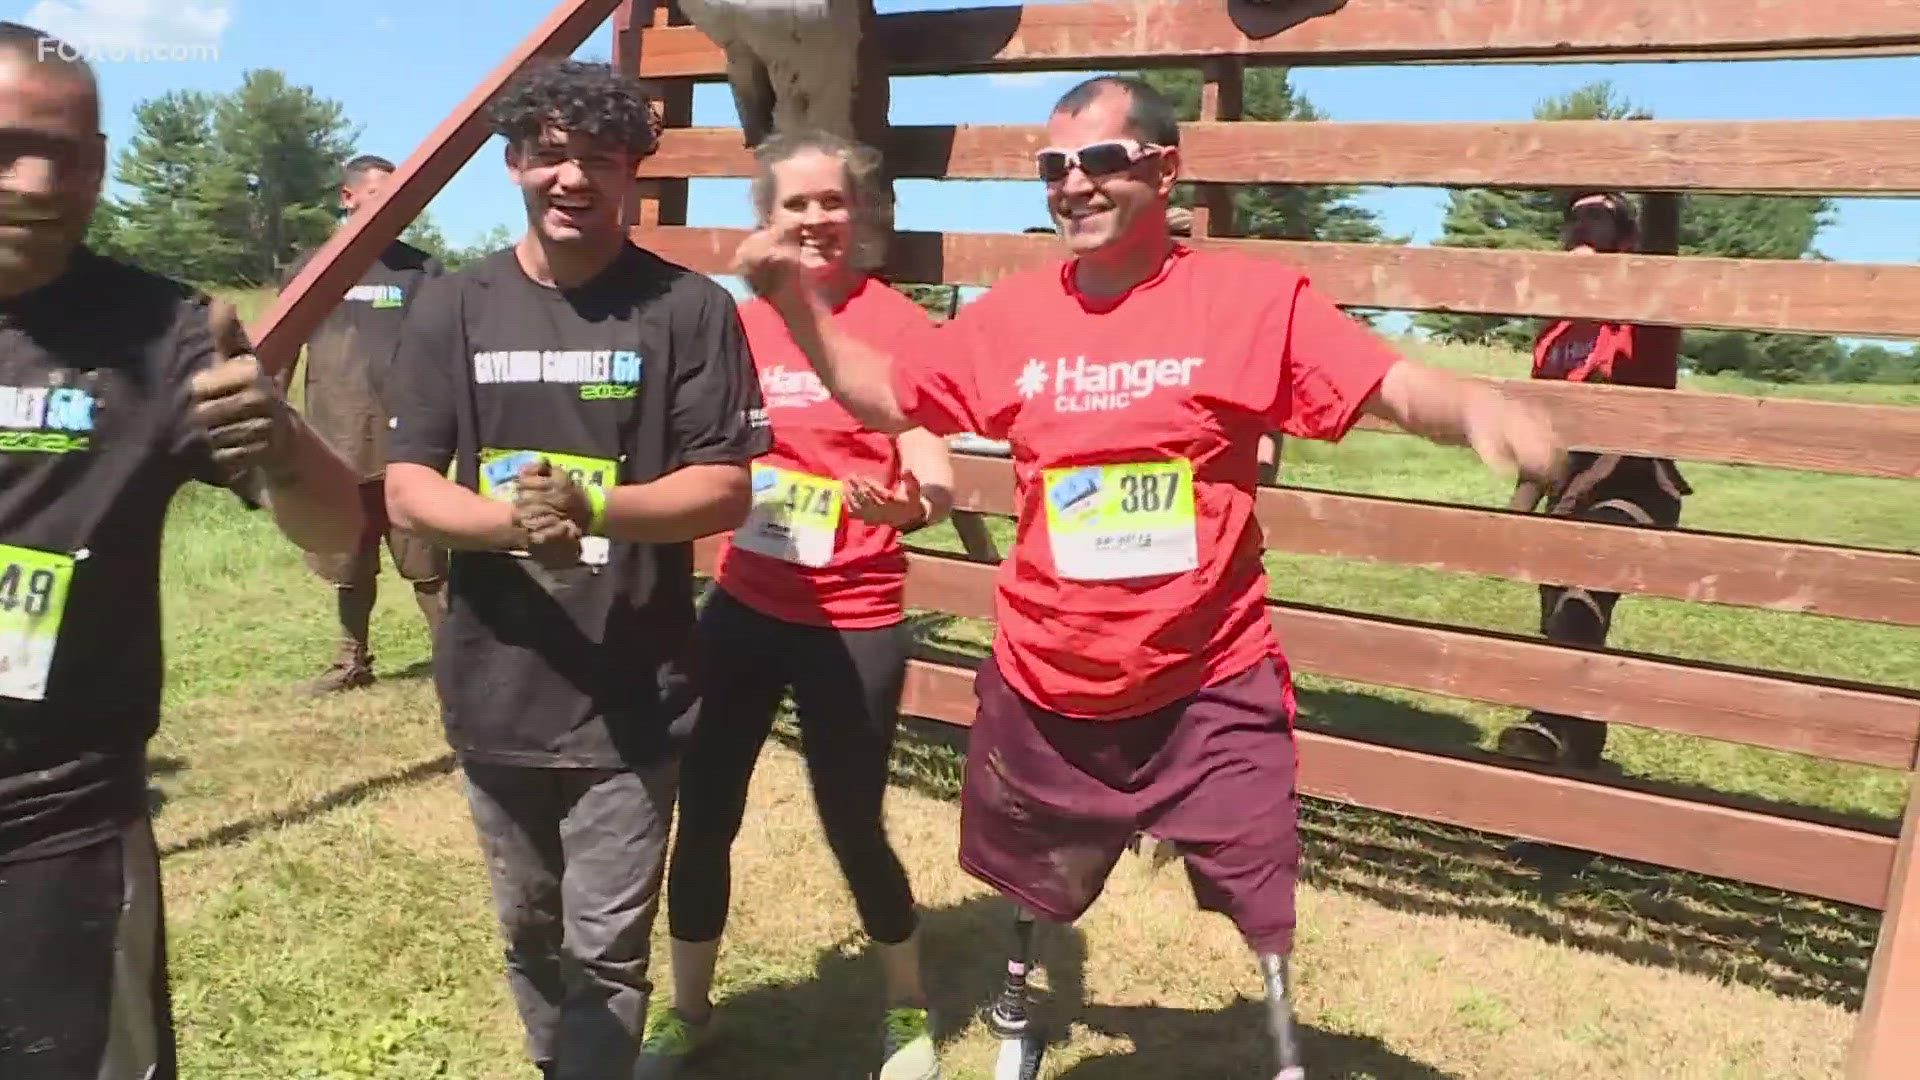 Athletes of all abilities were put to the test Saturday at the 10th annual Gaylord Gauntlet 5K Trail and Obstacle Run in Wallingford.